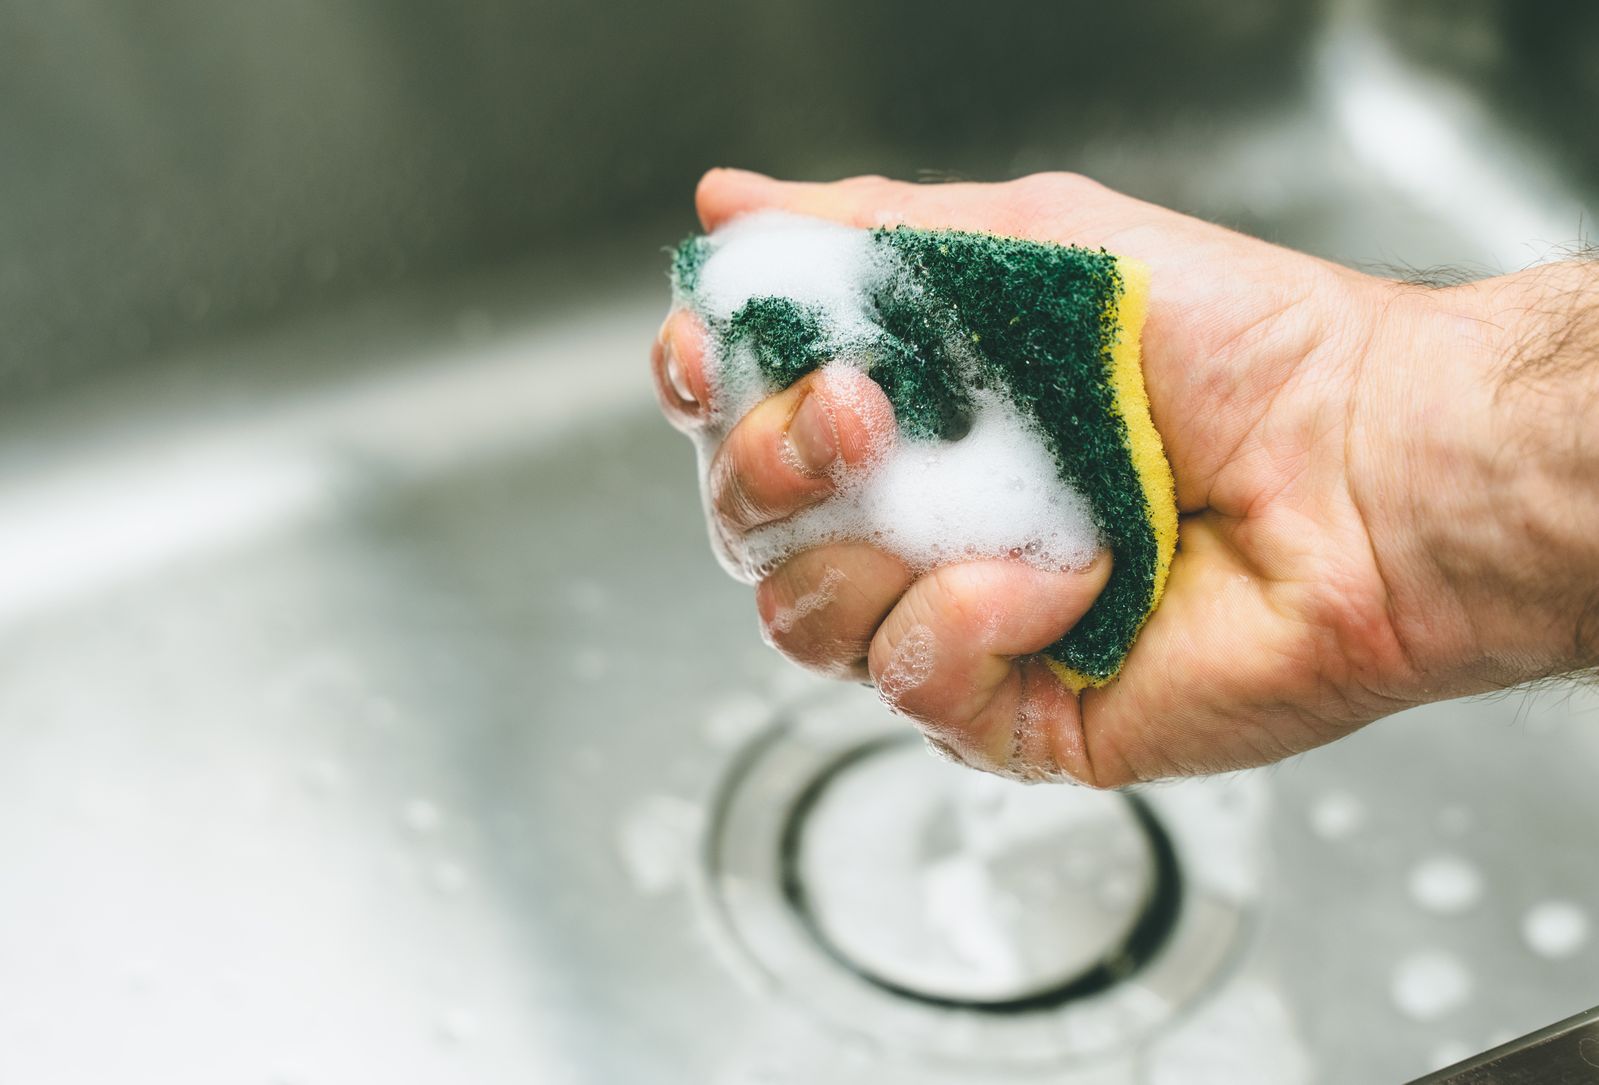 Your Kitchen Sponge Is a Better Home for Bacteria Than a Petri Dish | Smart News